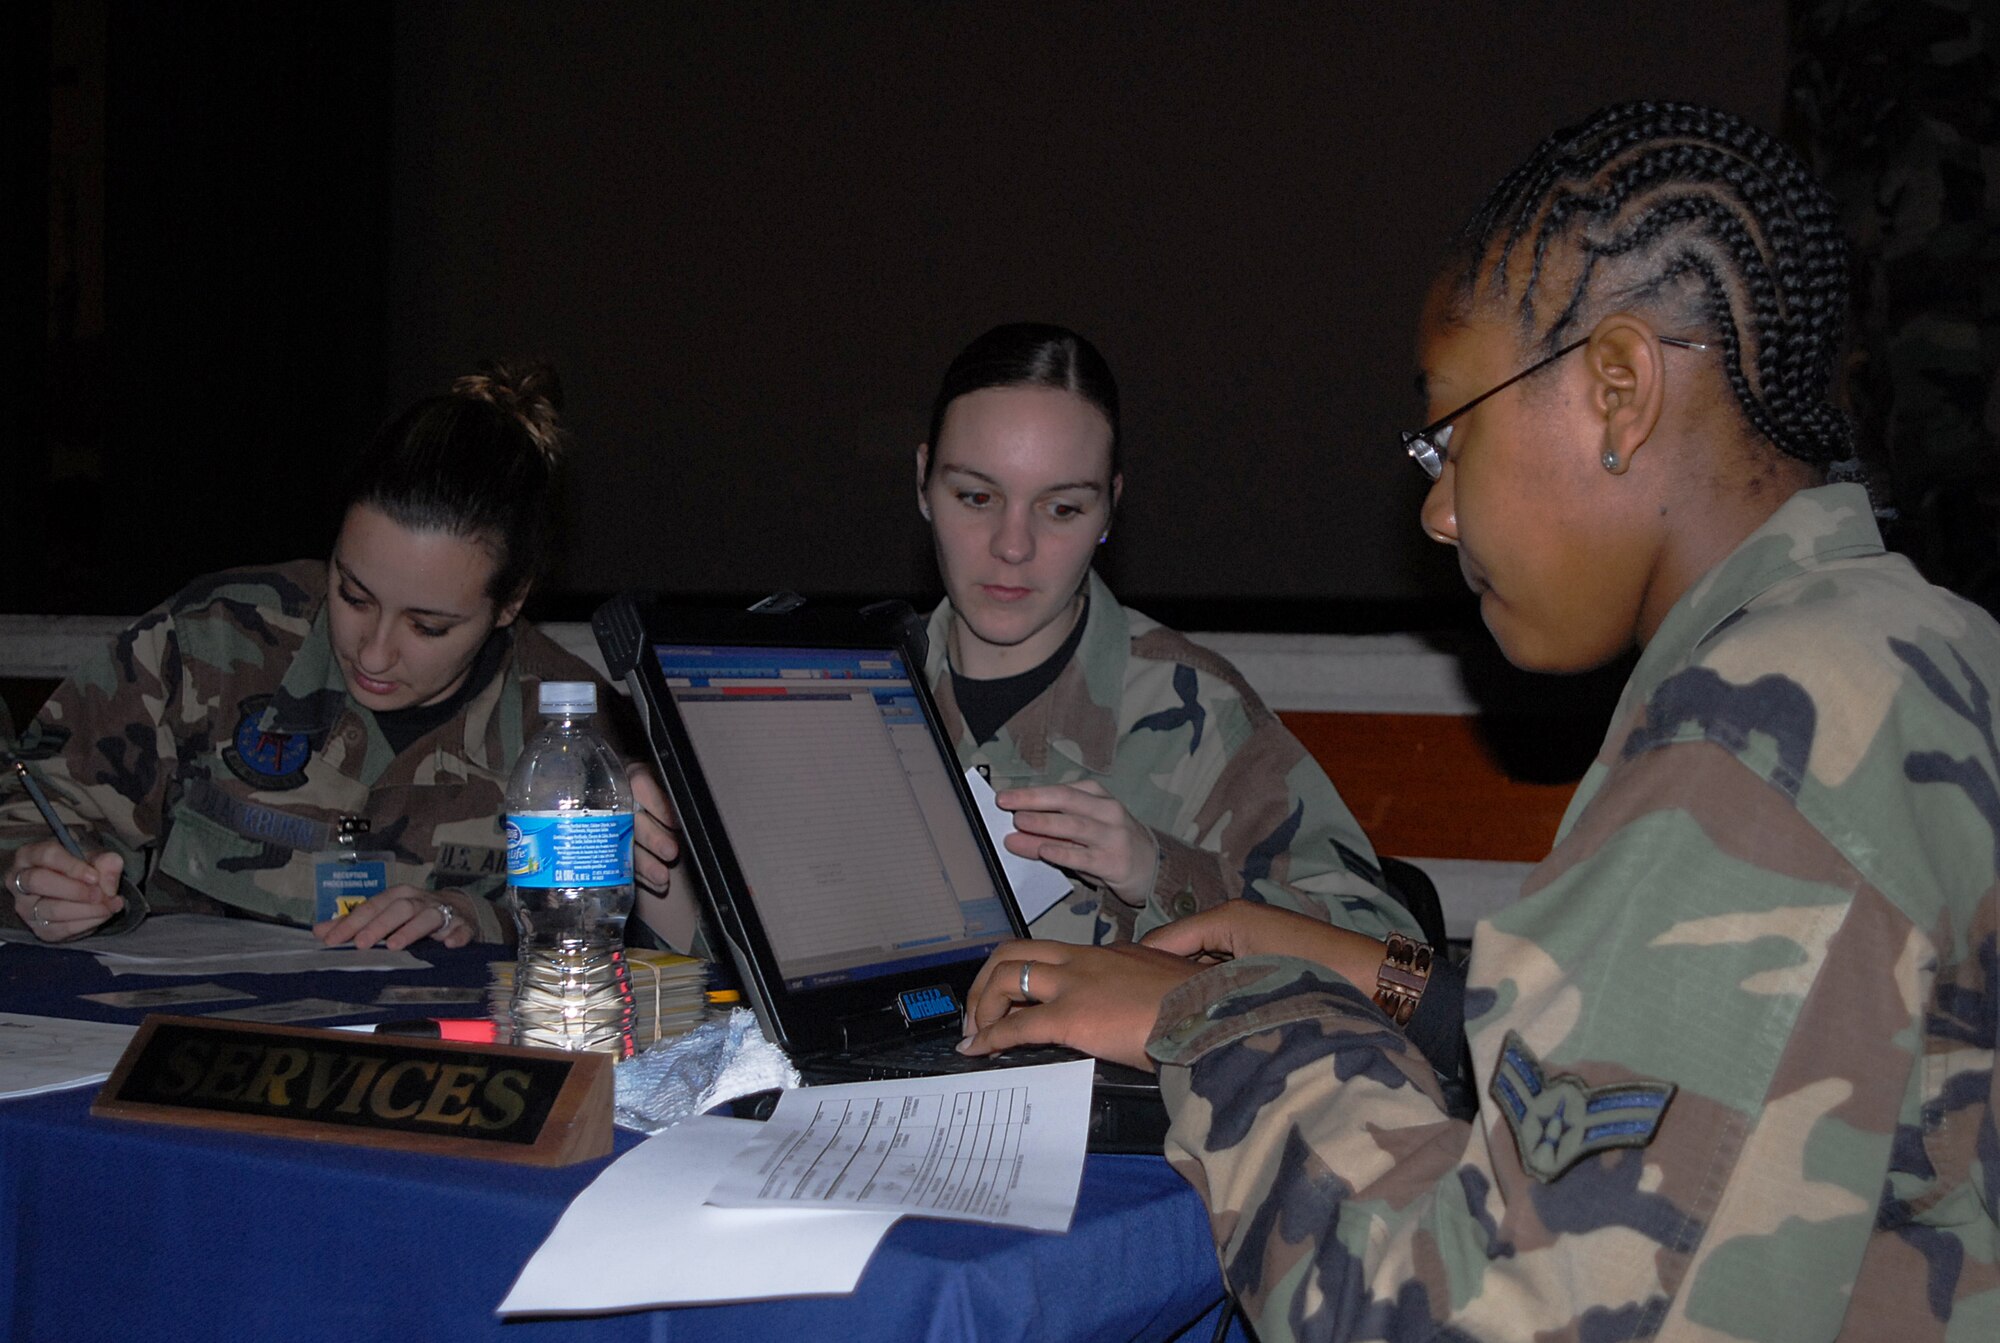 Airman 1st Class Tanya Blackburn, Senior Airman Arrin Lee, and Senior Airman Jessica Jackson, 18th Services Squadron, assign billeting arrangements for inbound forces at the reception processing unit during local operational readiness exercise Beverly High 08-4 at Kadena Air Base, Japan, Feb. 12, 2008. The 18th Wing conducted the exercise from Feb. 10 to 15 to test Airmen's ability to respond in contingency situations. (U.S. Air Force photo/Tech. Sgt. Anthony Iusi)